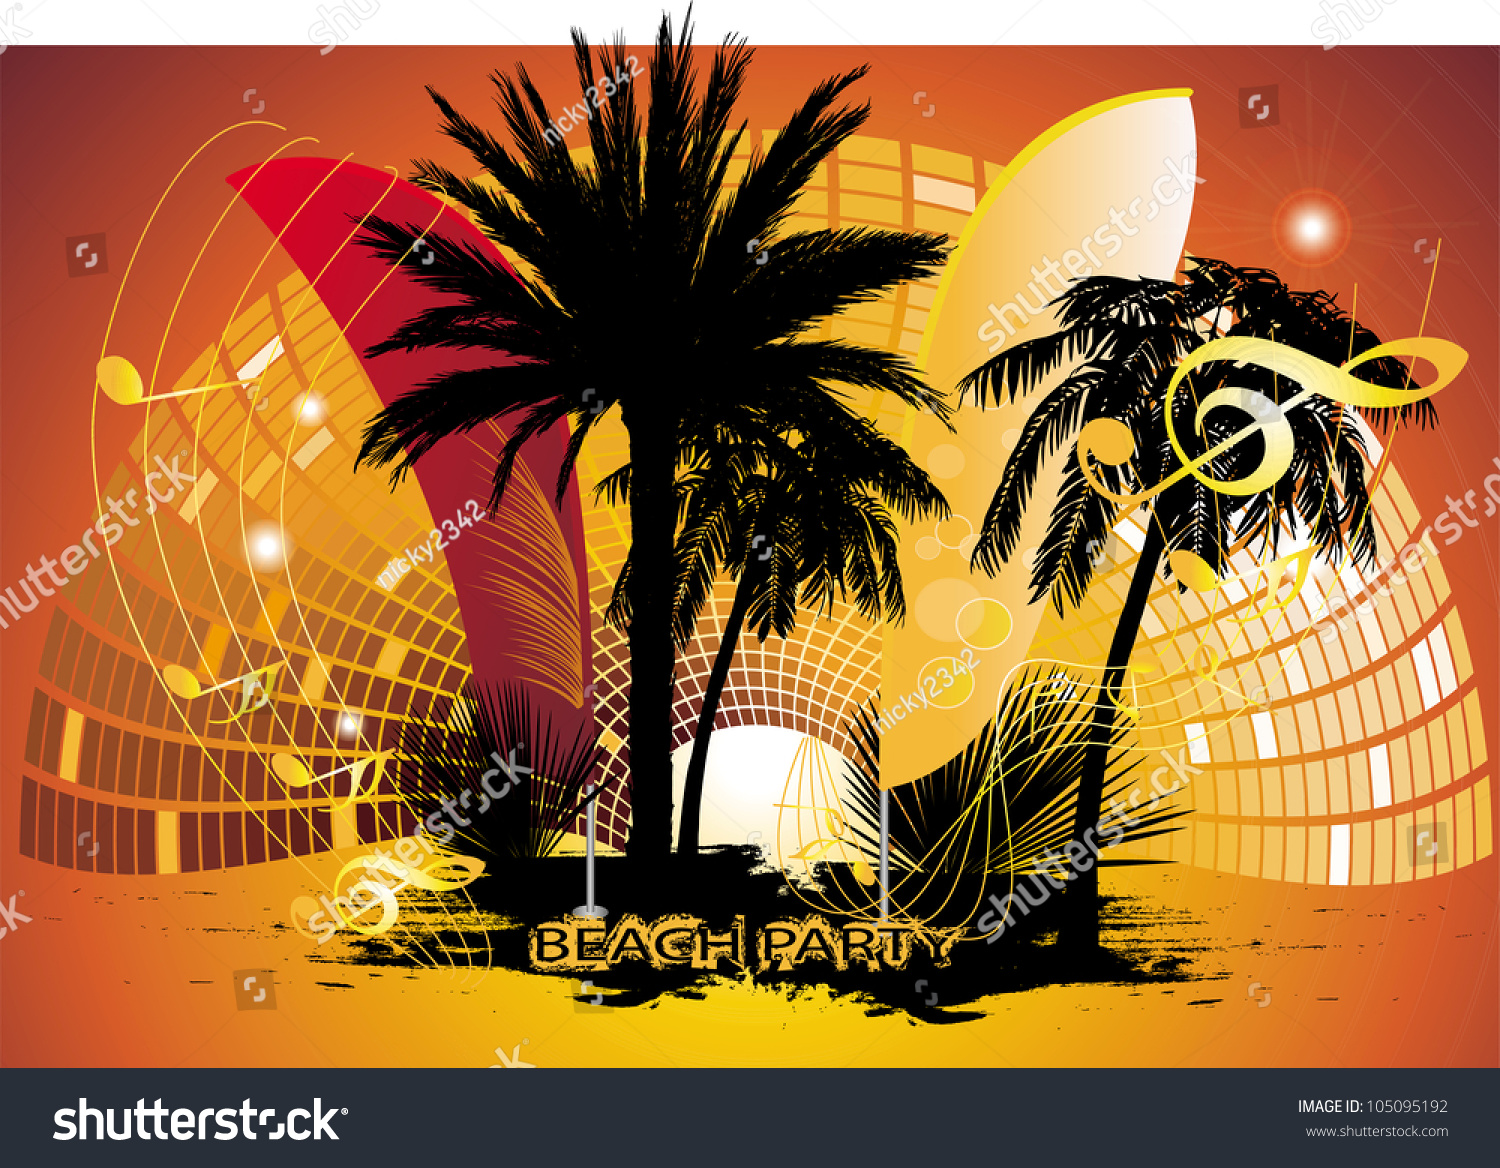 Beach Party Background Stock Vector Illustration 105095192 : Shutterstock